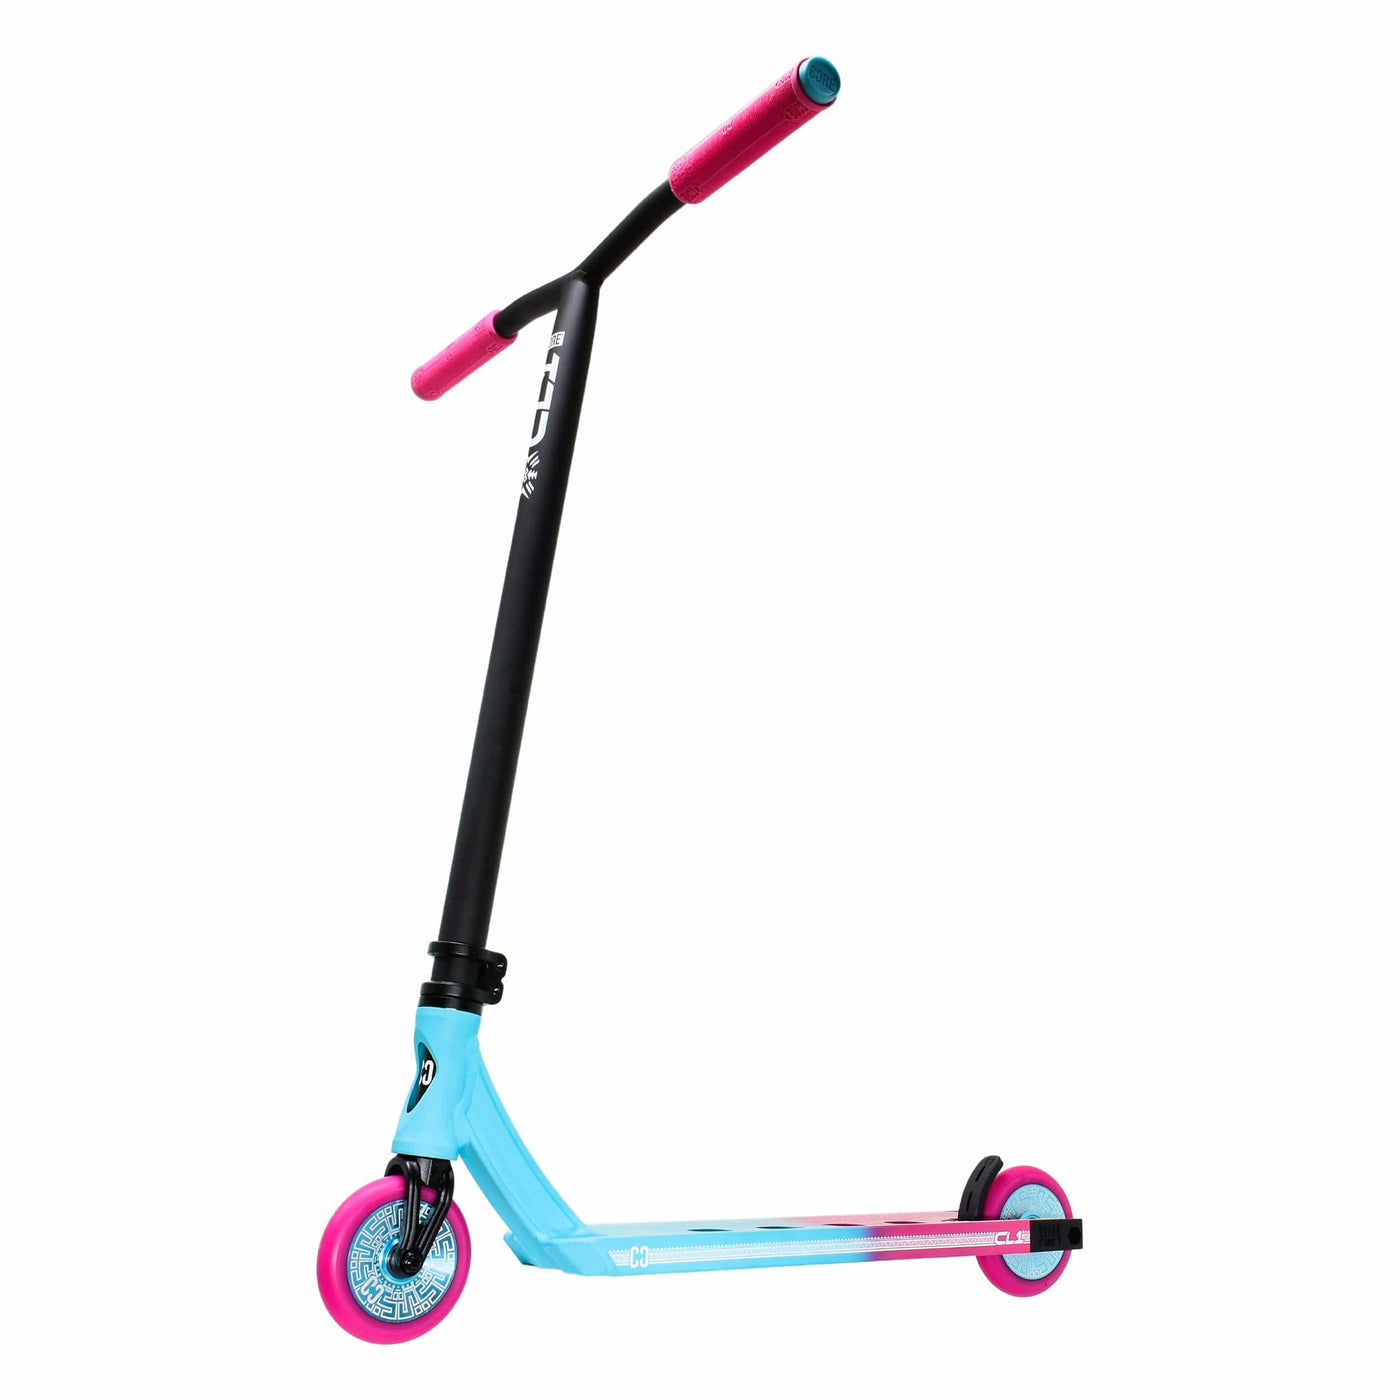 CORE CL1 Complete Stunt Scooter Pink & Teal I Adult Stunt Scooter Front Alternate Side